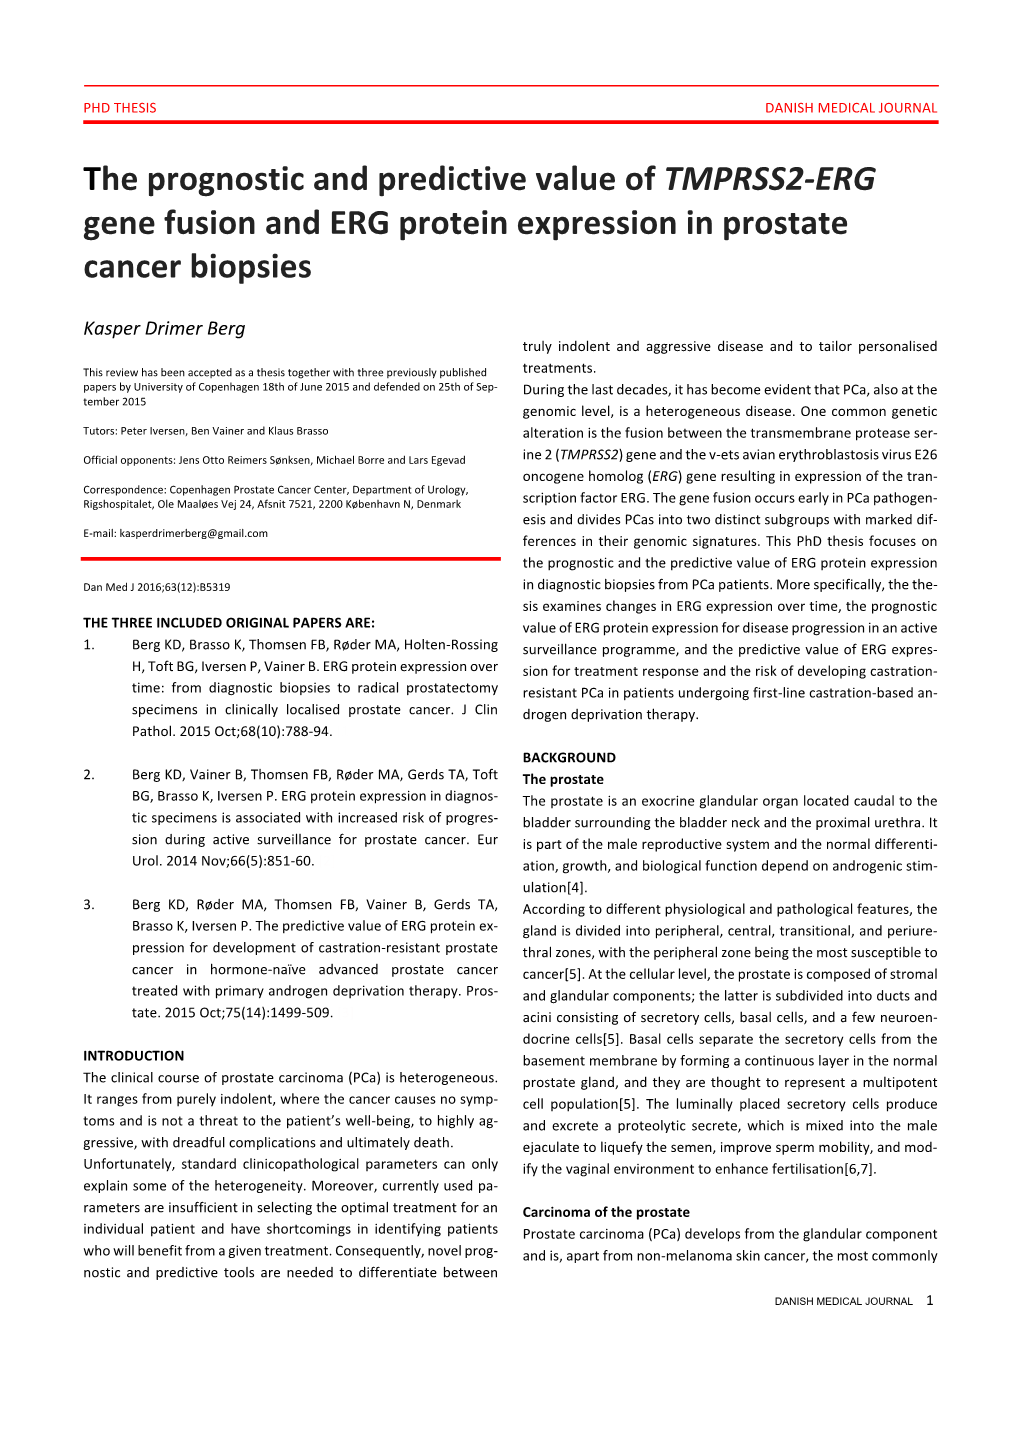 The Prognostic and Predictive Value of TMPRSS2-ERG Gene Fusion and ERG Protein Expression in Prostate Cancer Biopsies